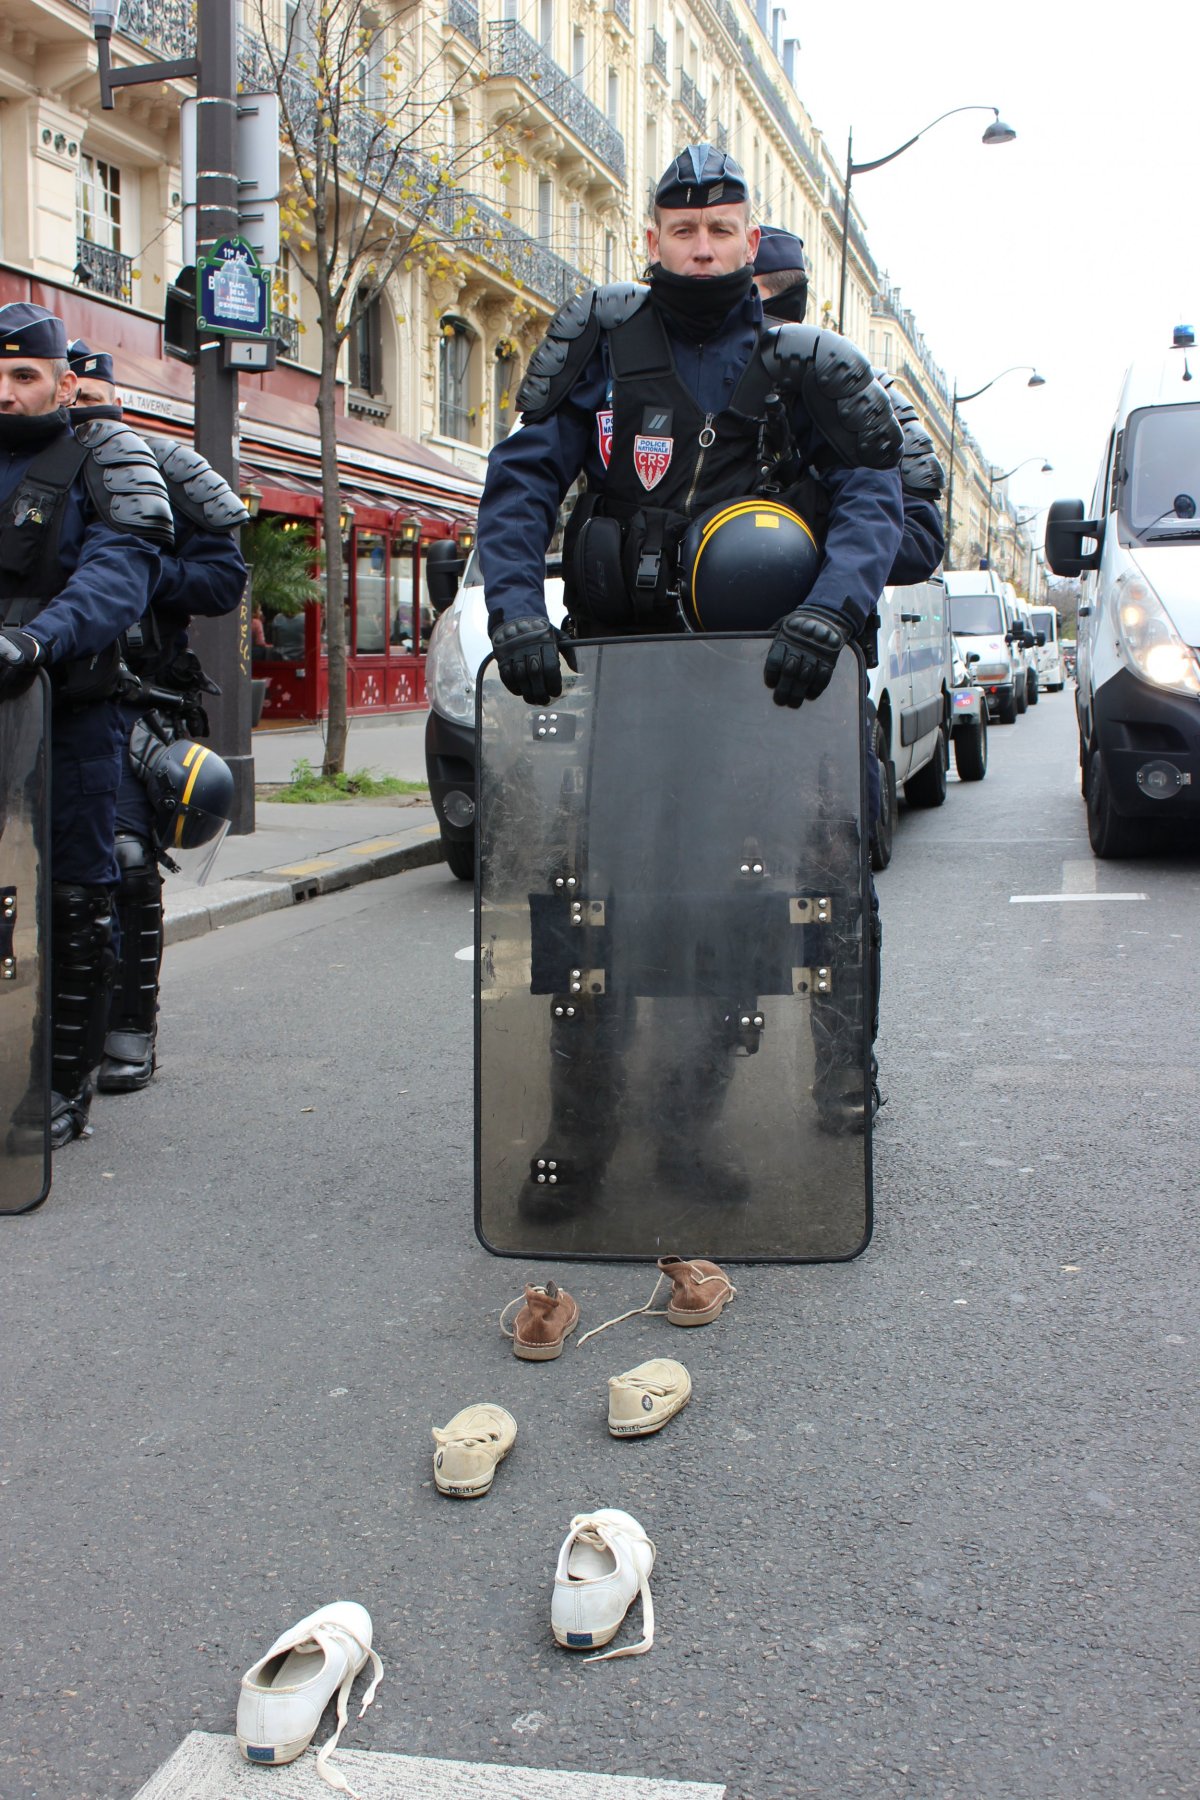 shoes-riot-police